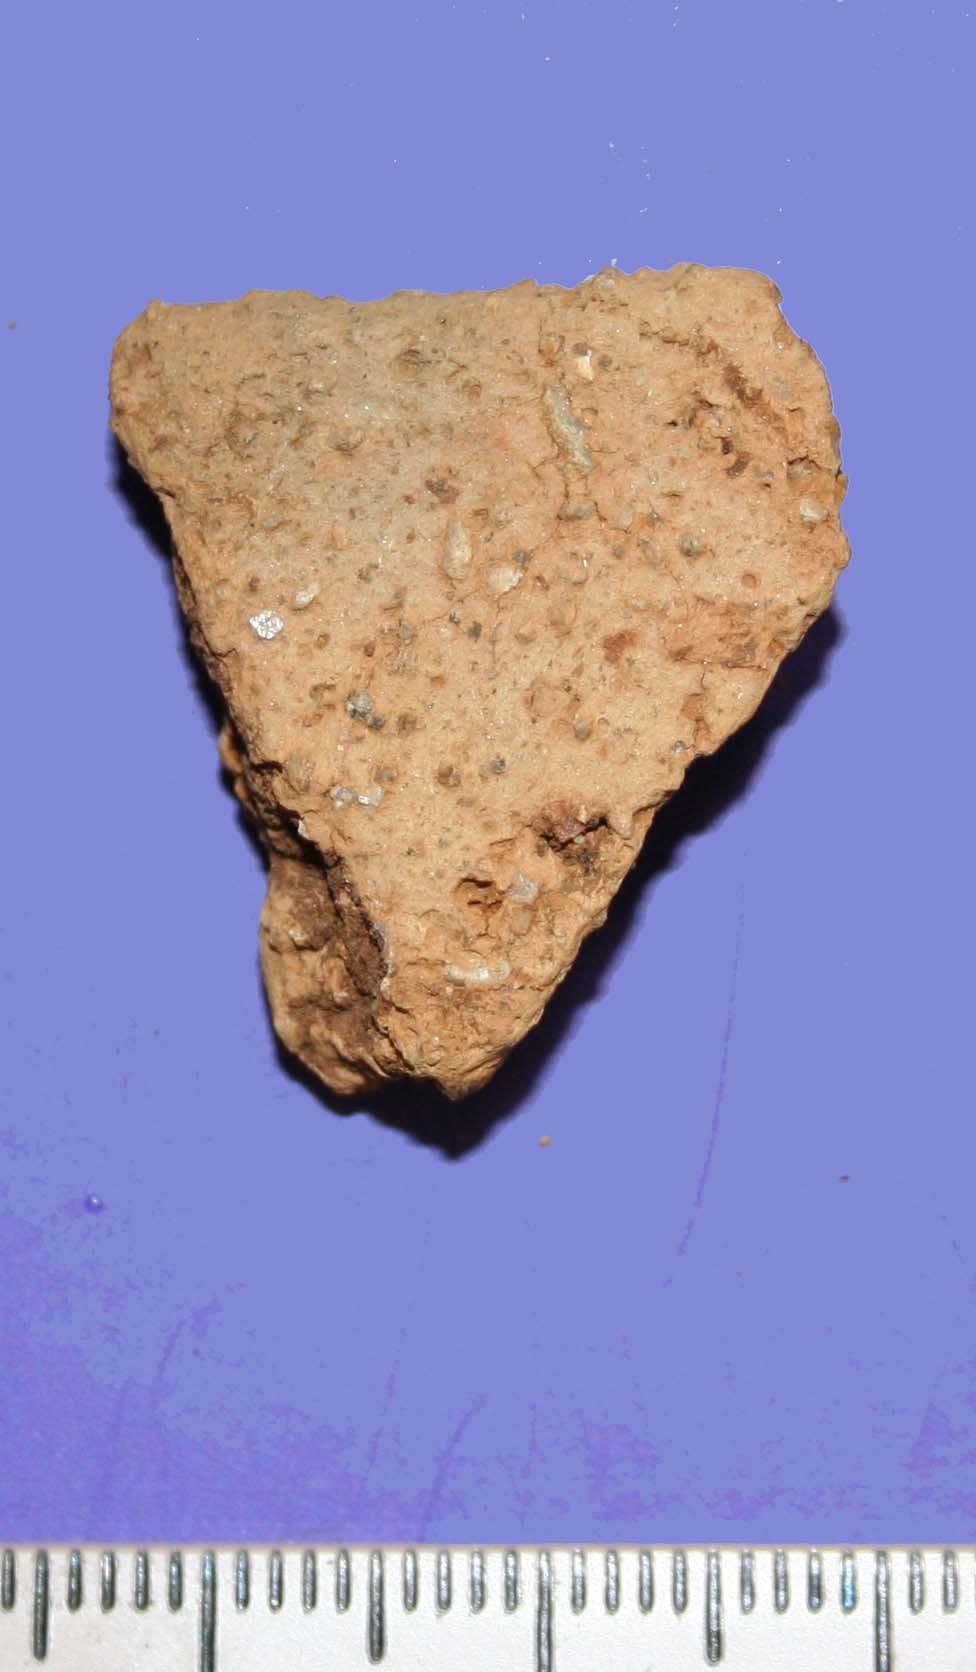 The exterior of the sherds show evidence of wiping. The fabric contains mica inclusions. It is difficult to identify what type of pottery this is or its age. Vessel 6 Single body sherd of pottery.